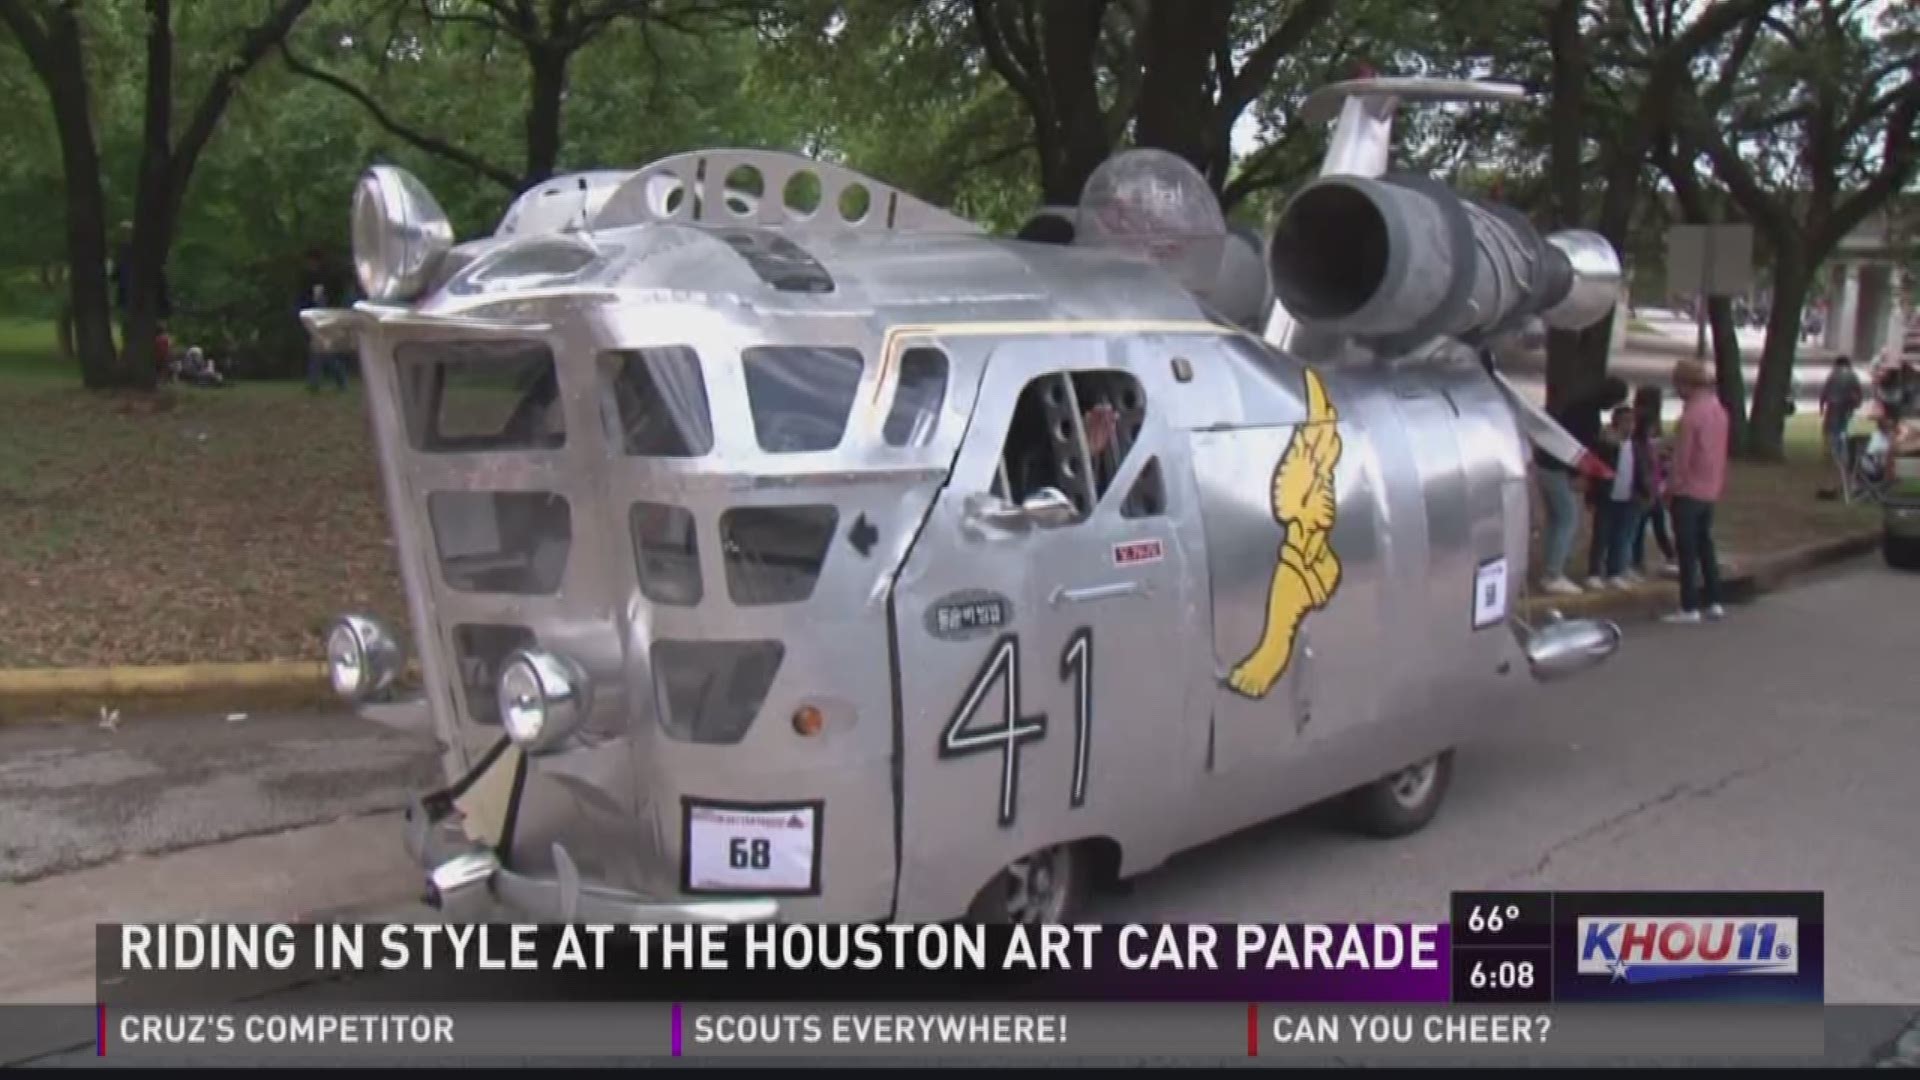 A Batmobile ... A Cat in the Hat ... and creatures of all shapes and sizes: The most creative cars were on display Saturday at the Houston Art Car Parade.